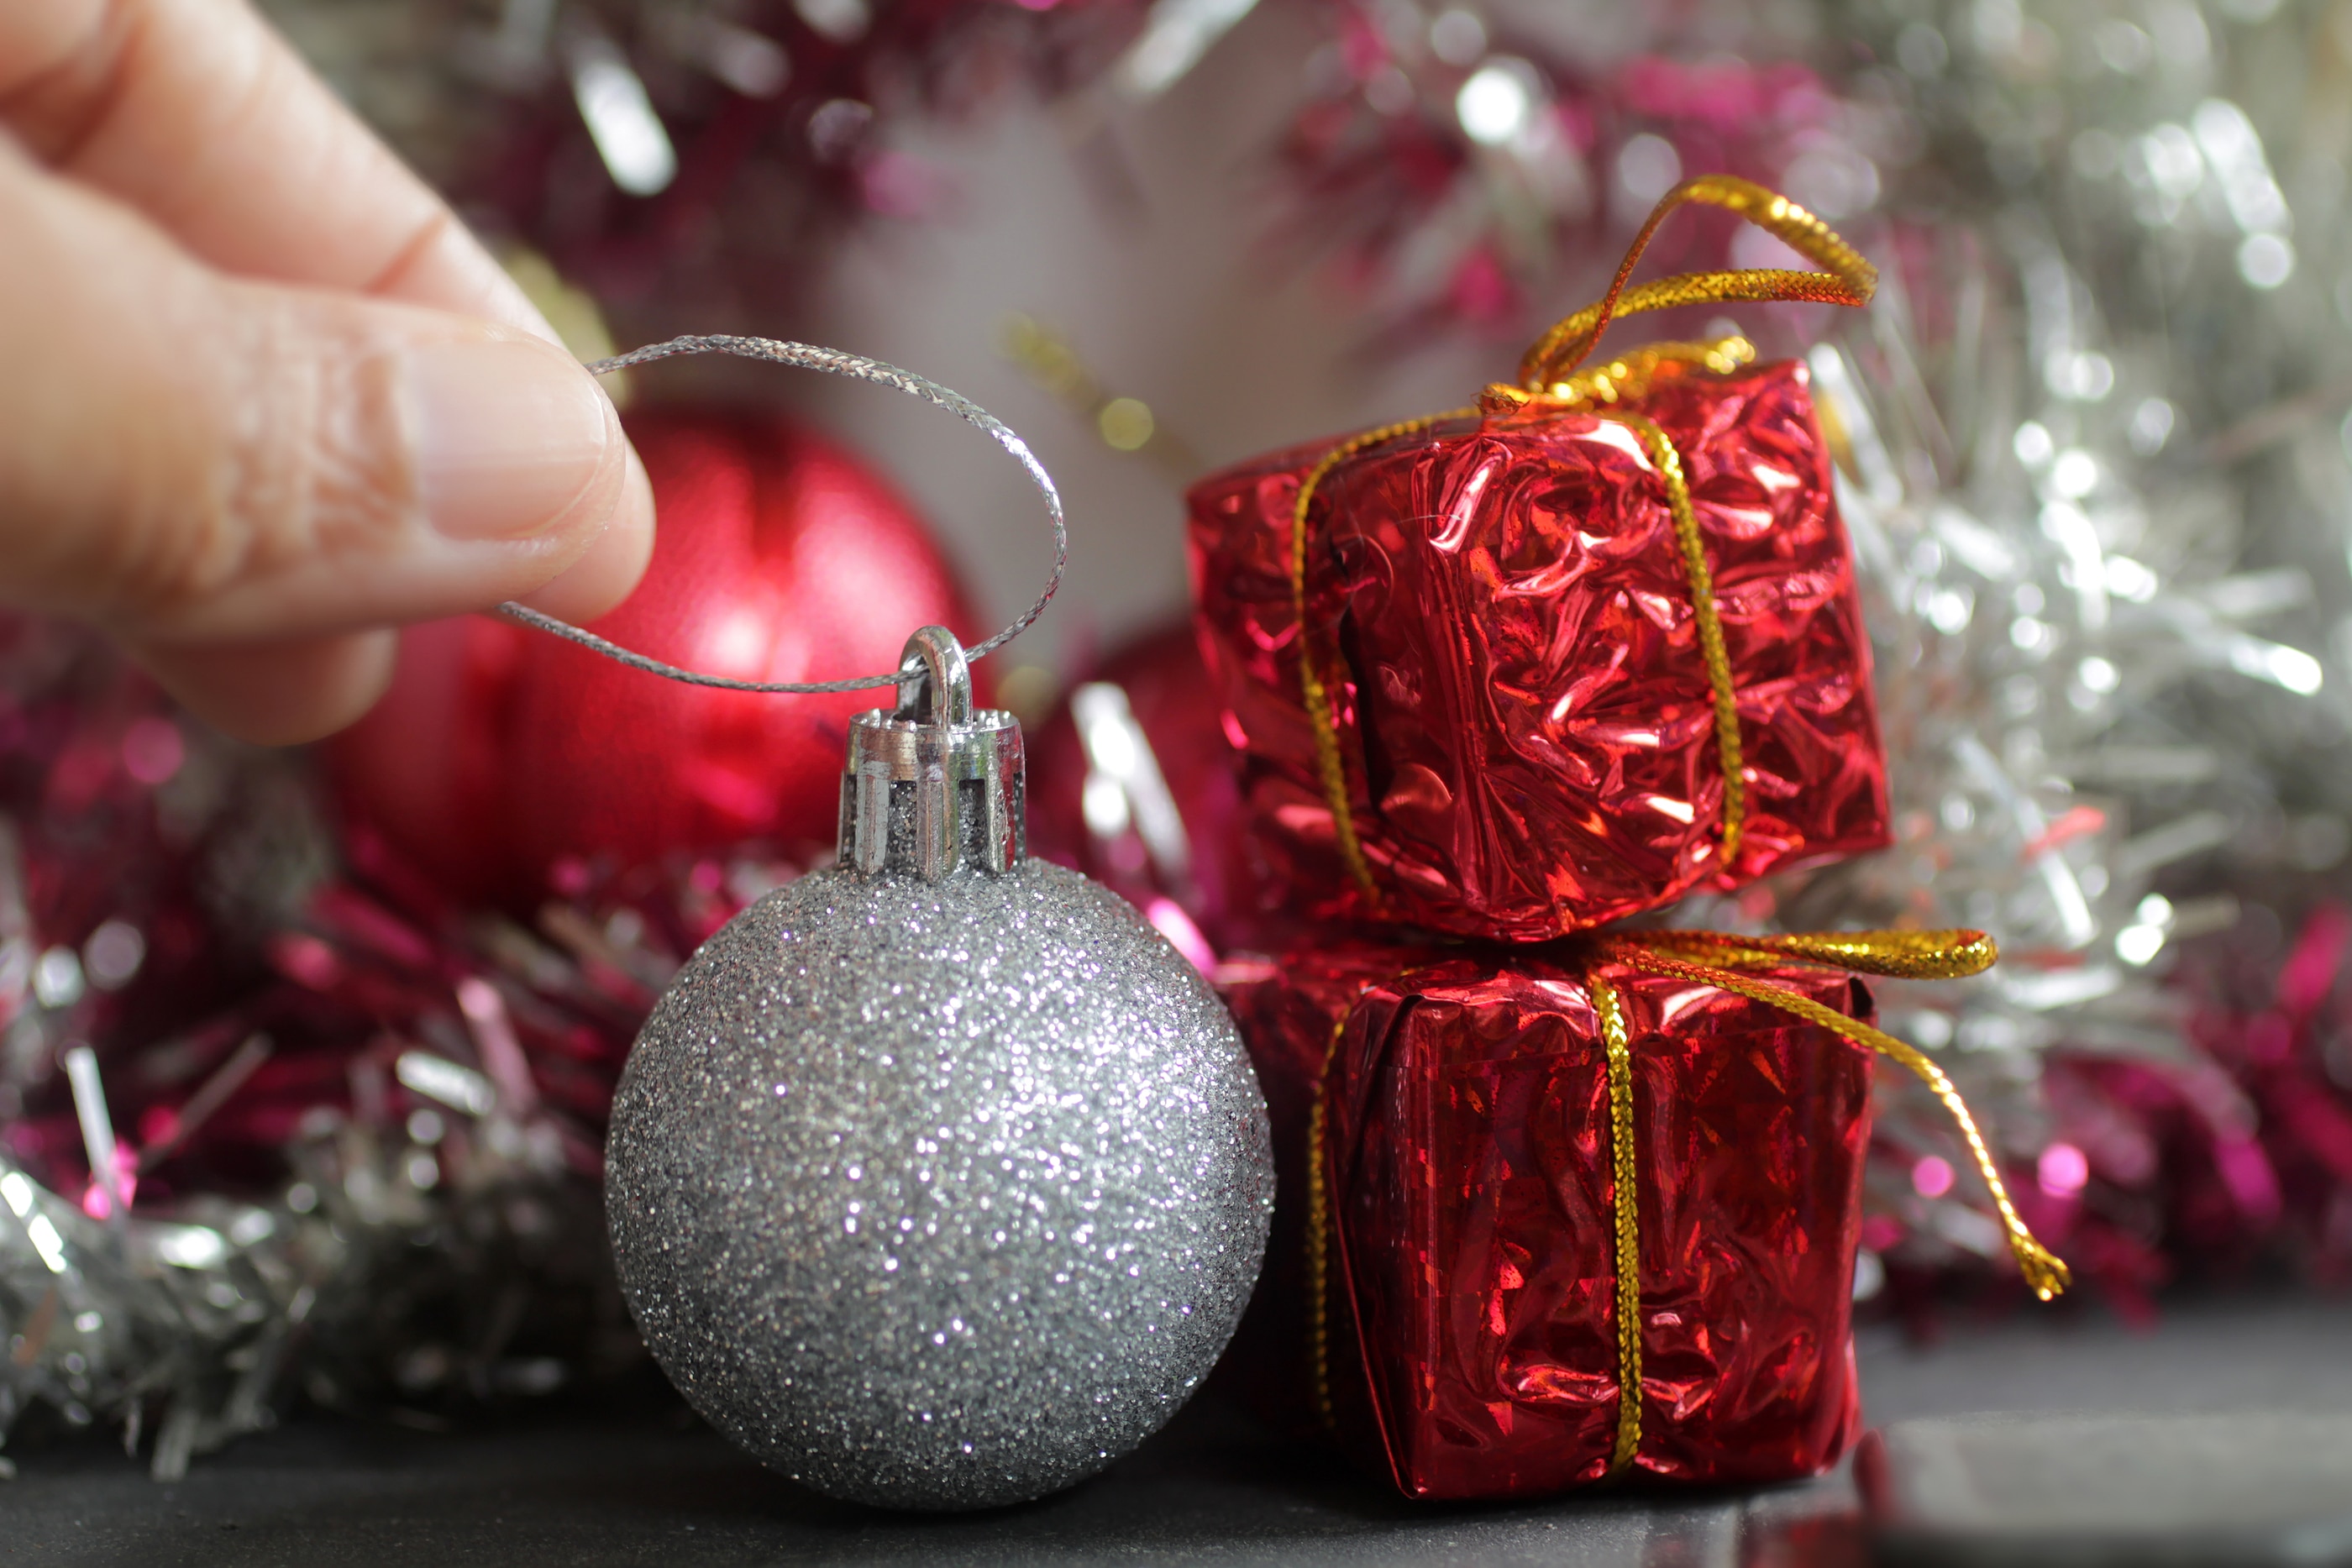 Ways to Tidy Up Your Holiday Decorations